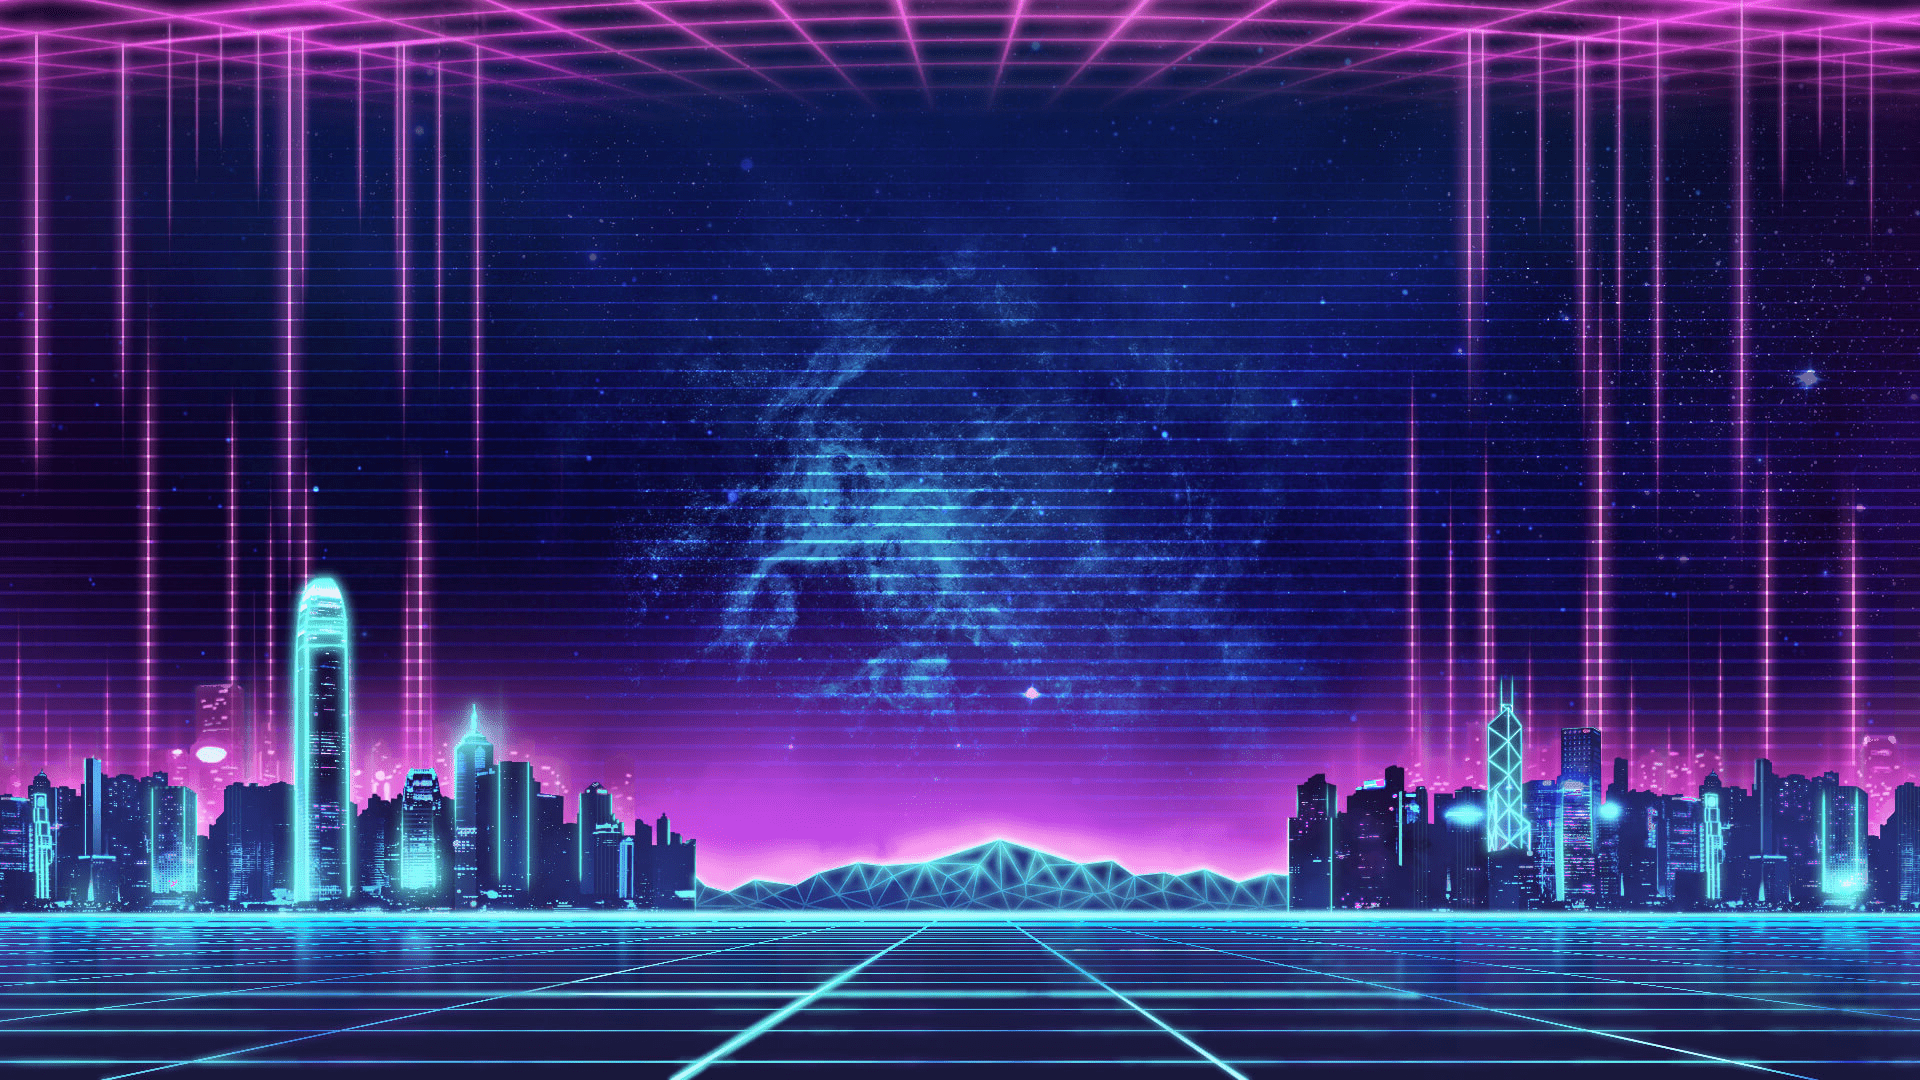 A retro city with neon lights and buildings - Synthwave